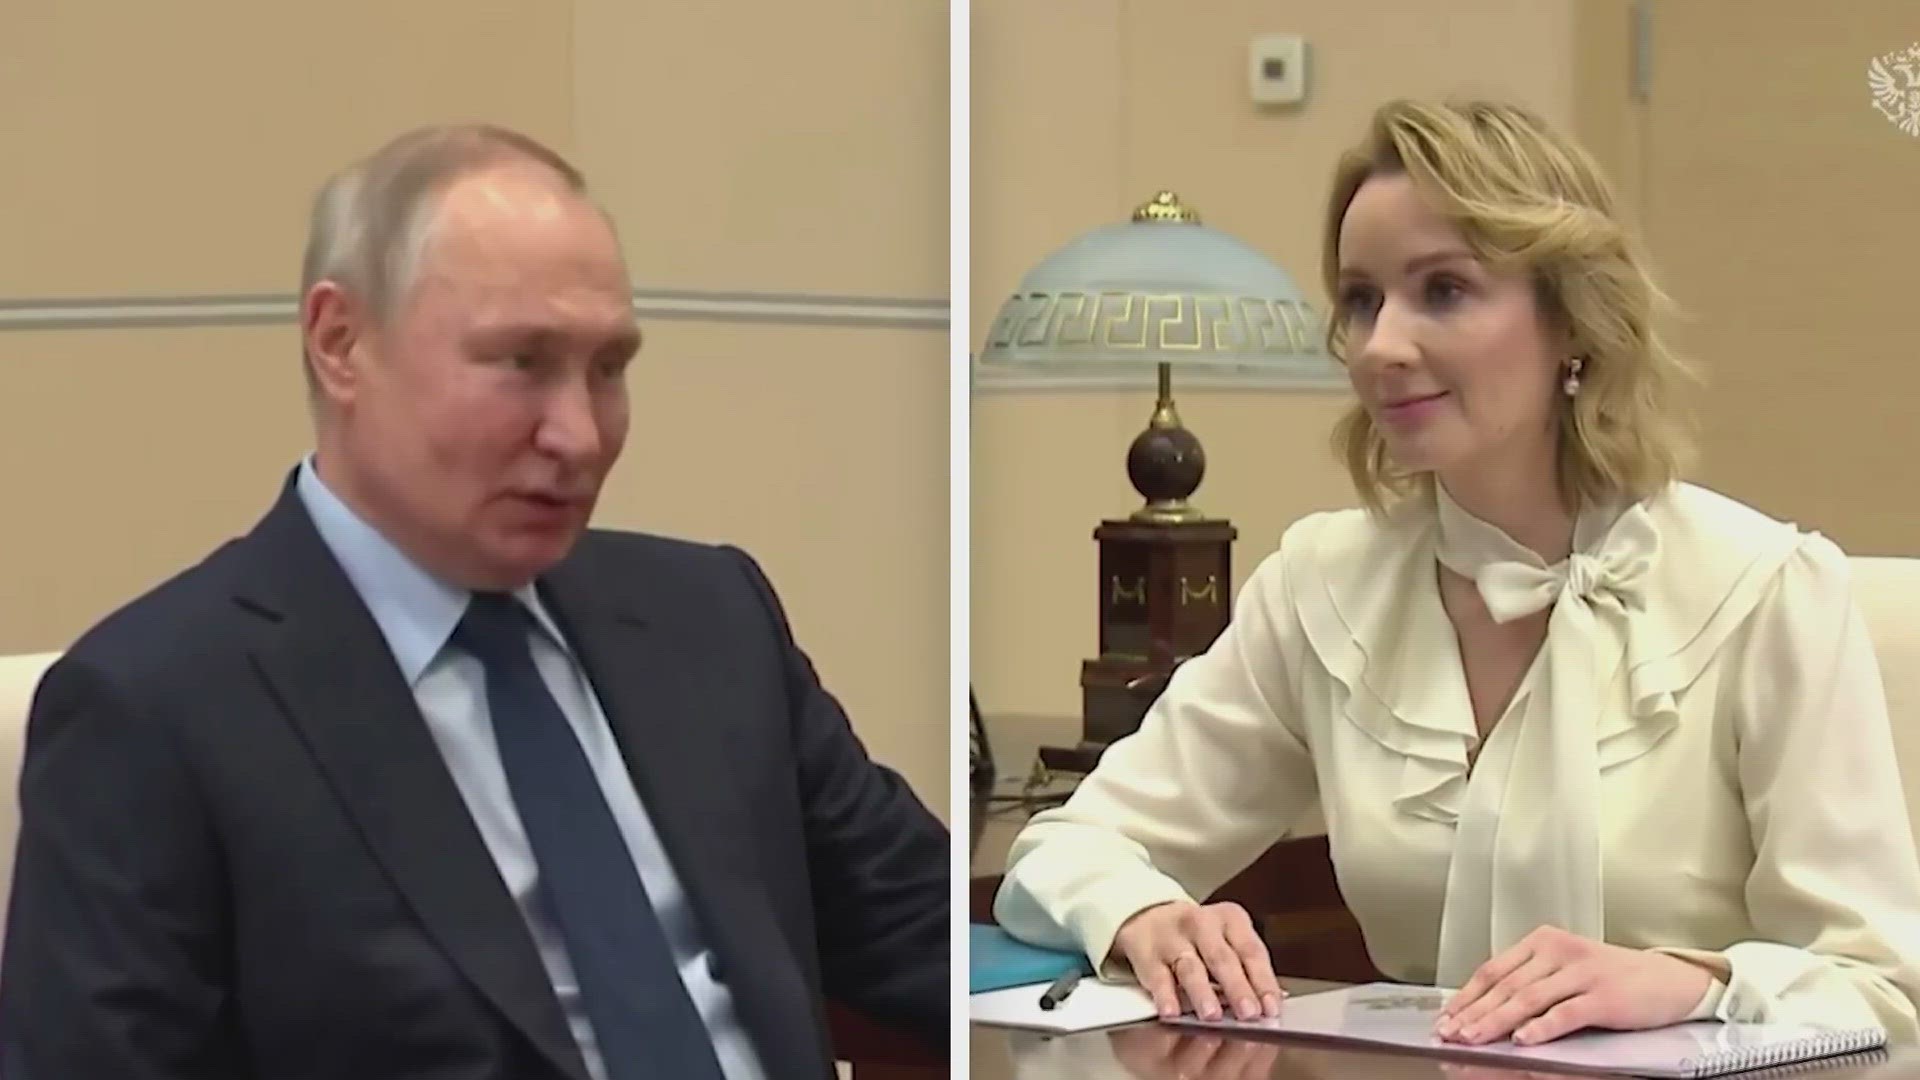 The international criminal court has issued arrest warrants for Russian president Vladimir Putin and Maria lvova-Belova, a member of Putin's government.